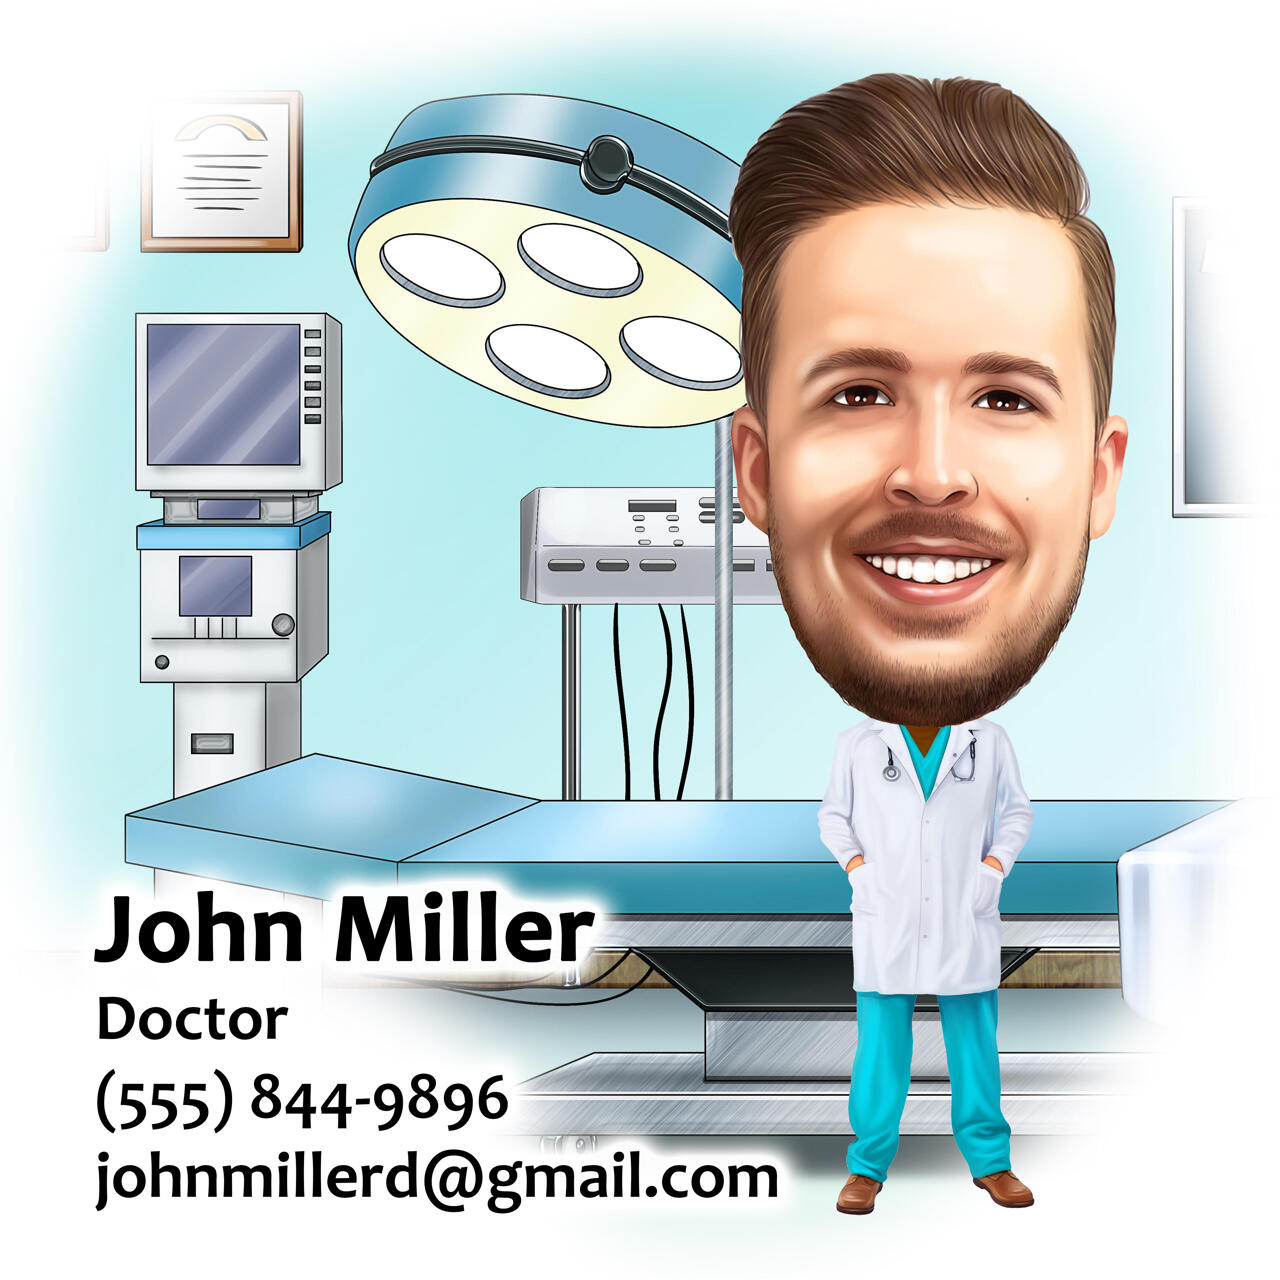 caricature business cards 2